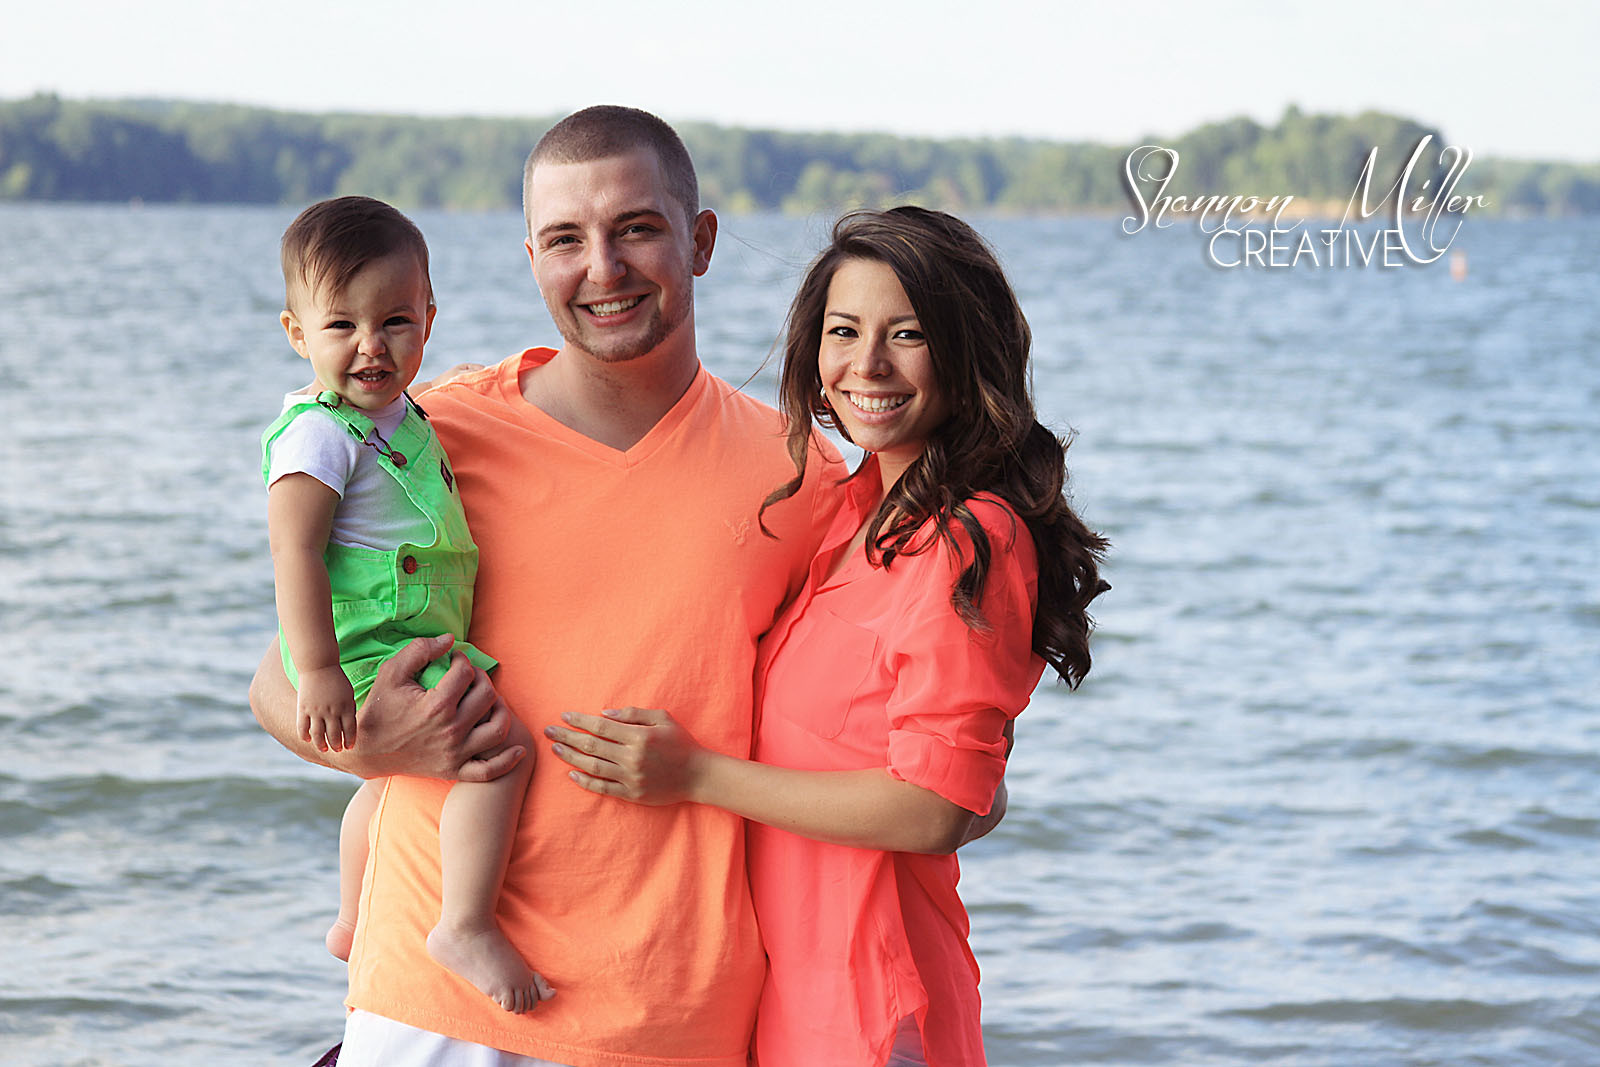 Family Picture Ideas Summer
 Summertime Summertime Sum sum summertime Fun Family